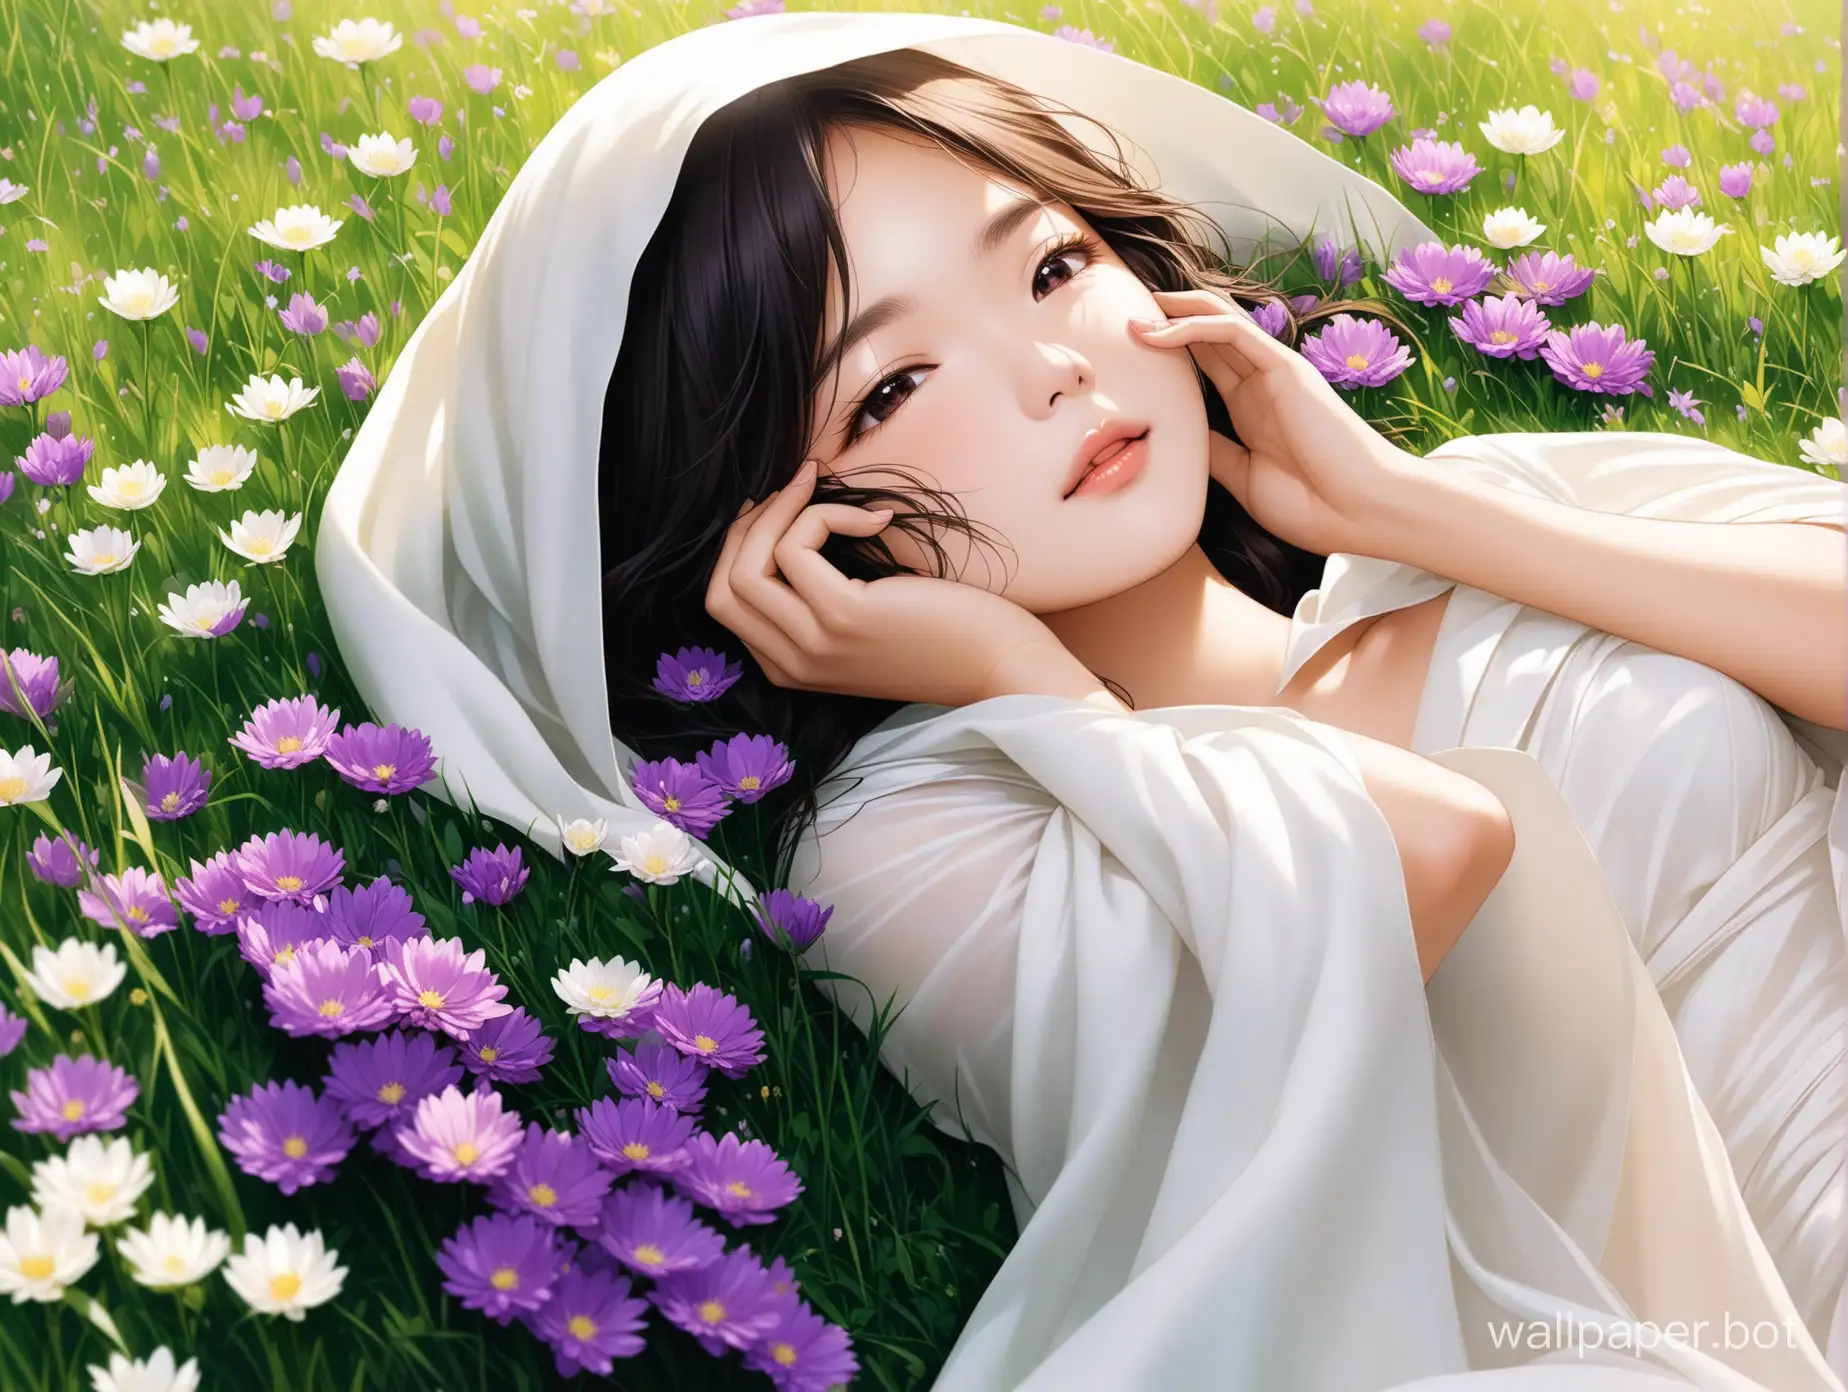 song hye kyo at 20 years old, laying side draped with a white cloak partially exposing her body on grass with some saturated purple flowers partially covering the girl's face with flowers